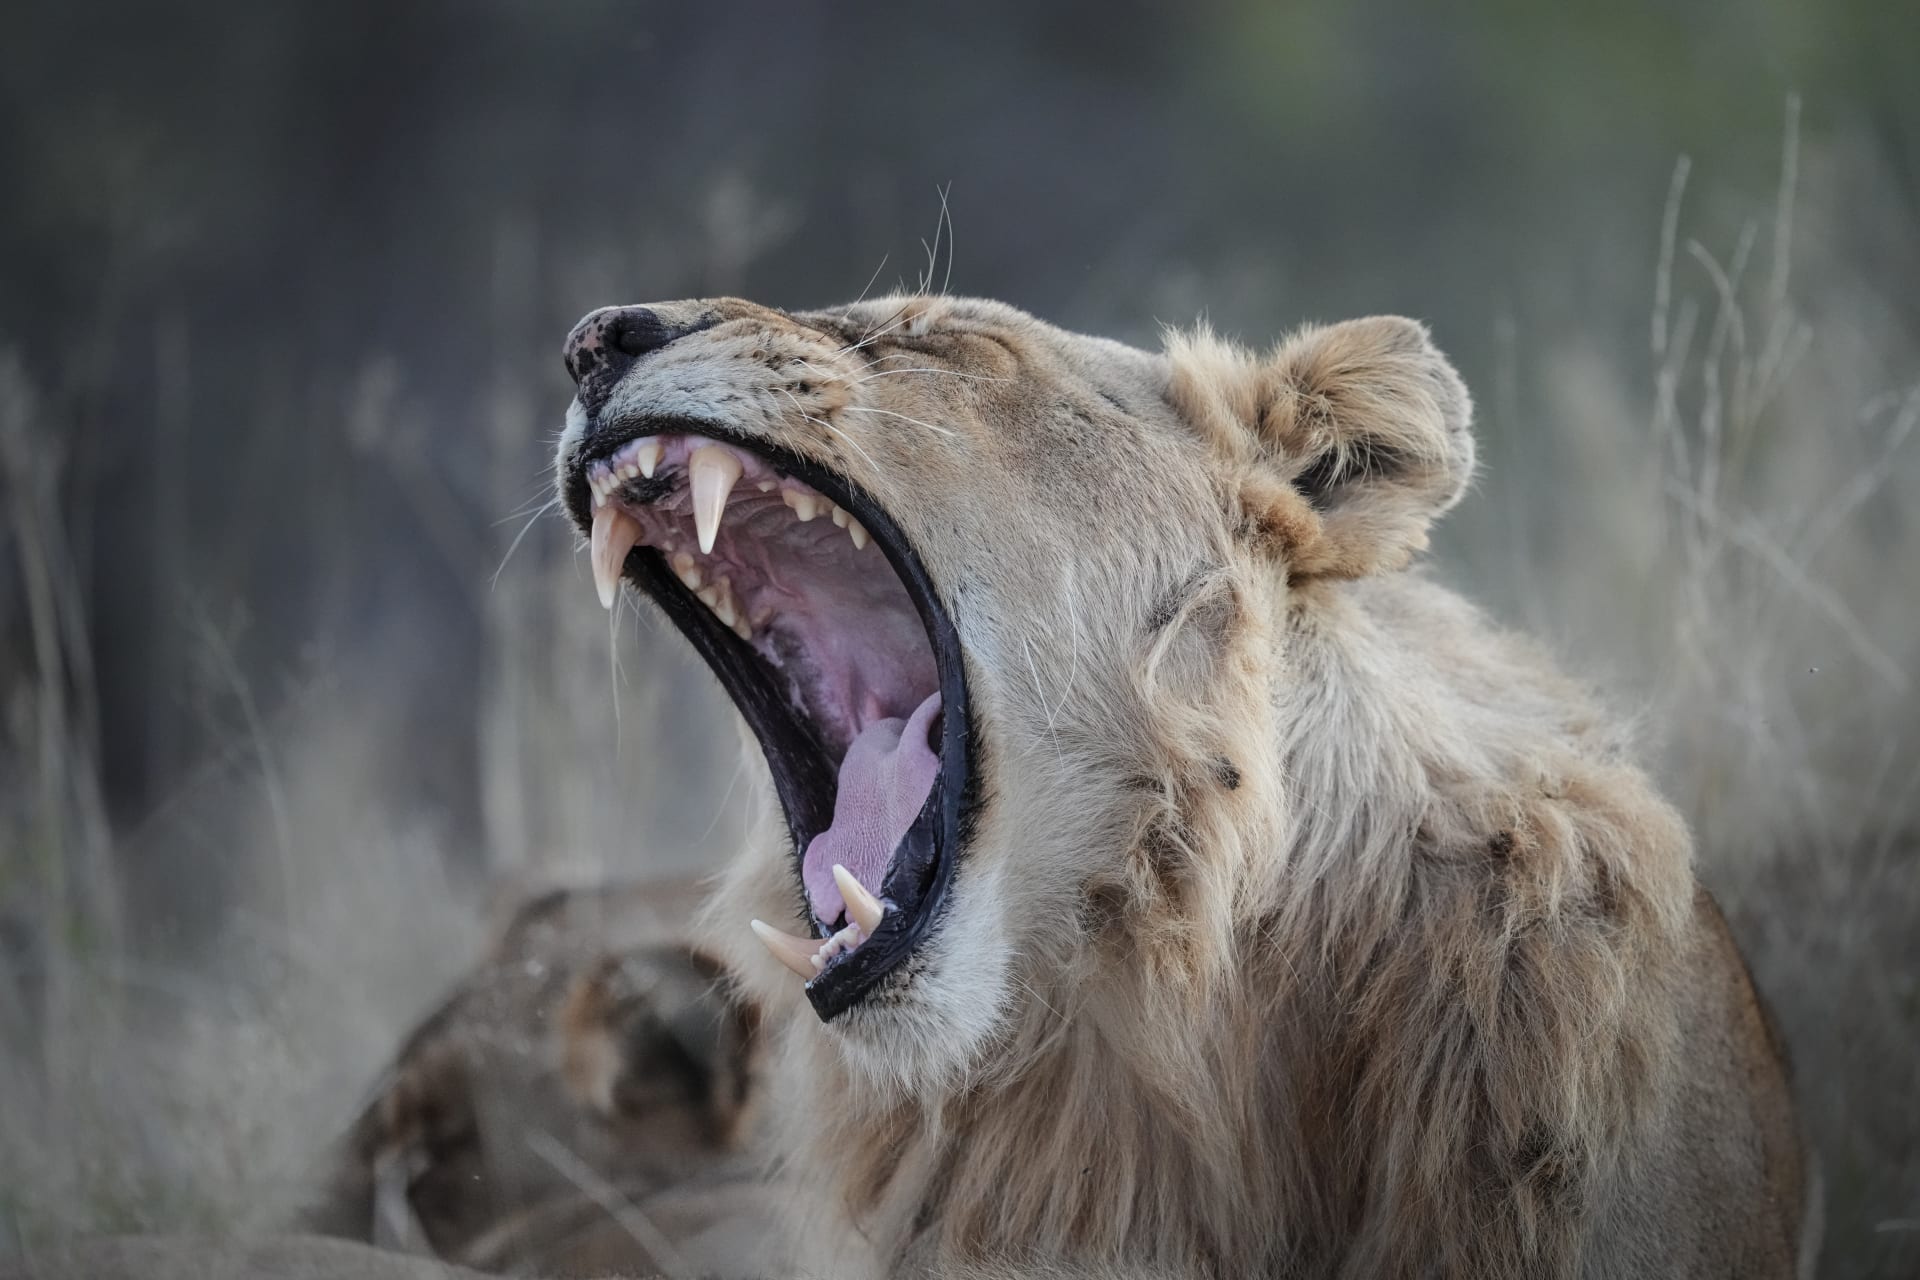 Over 30 million views.. Breathtaking video of a fight between a man and a young lion